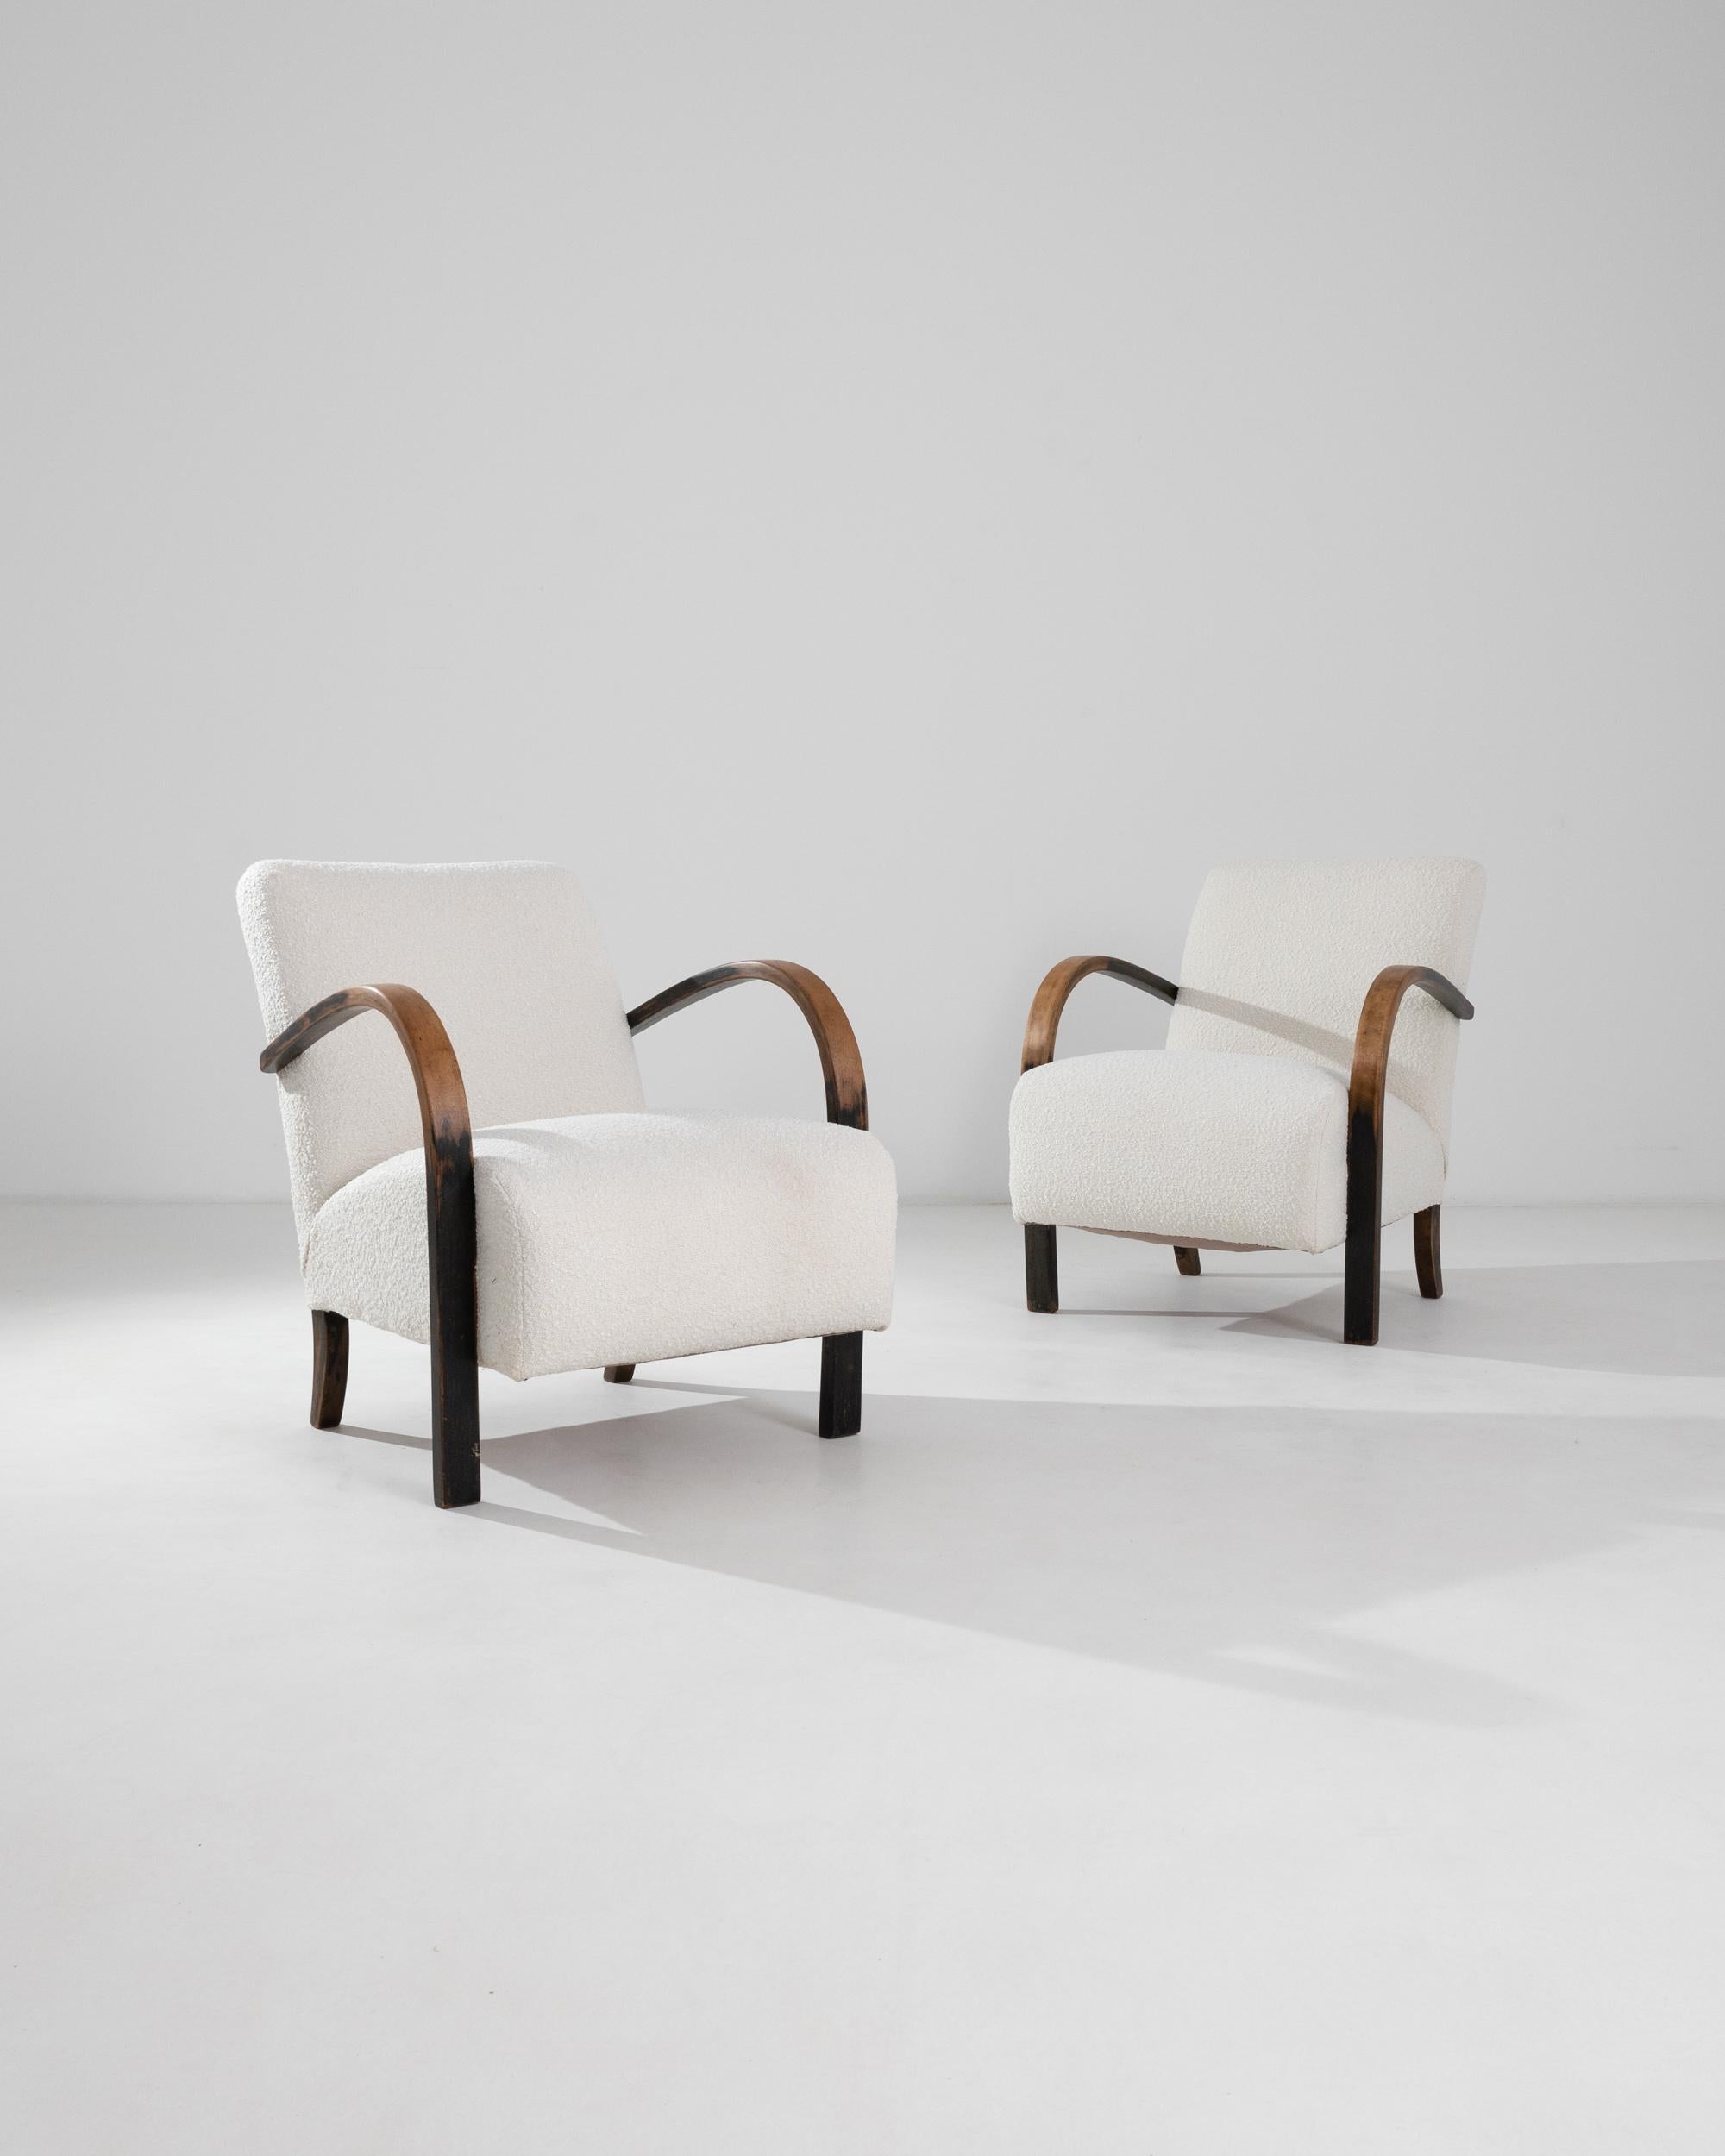 These sculptural armchairs, designed in Czechia around 1950, showcase the flowing outlines of their bentwood armrests, complementing the smooth curves of the back legs. Attributed to designer Jindrich Halabala, these chairs exhibit a typical Central